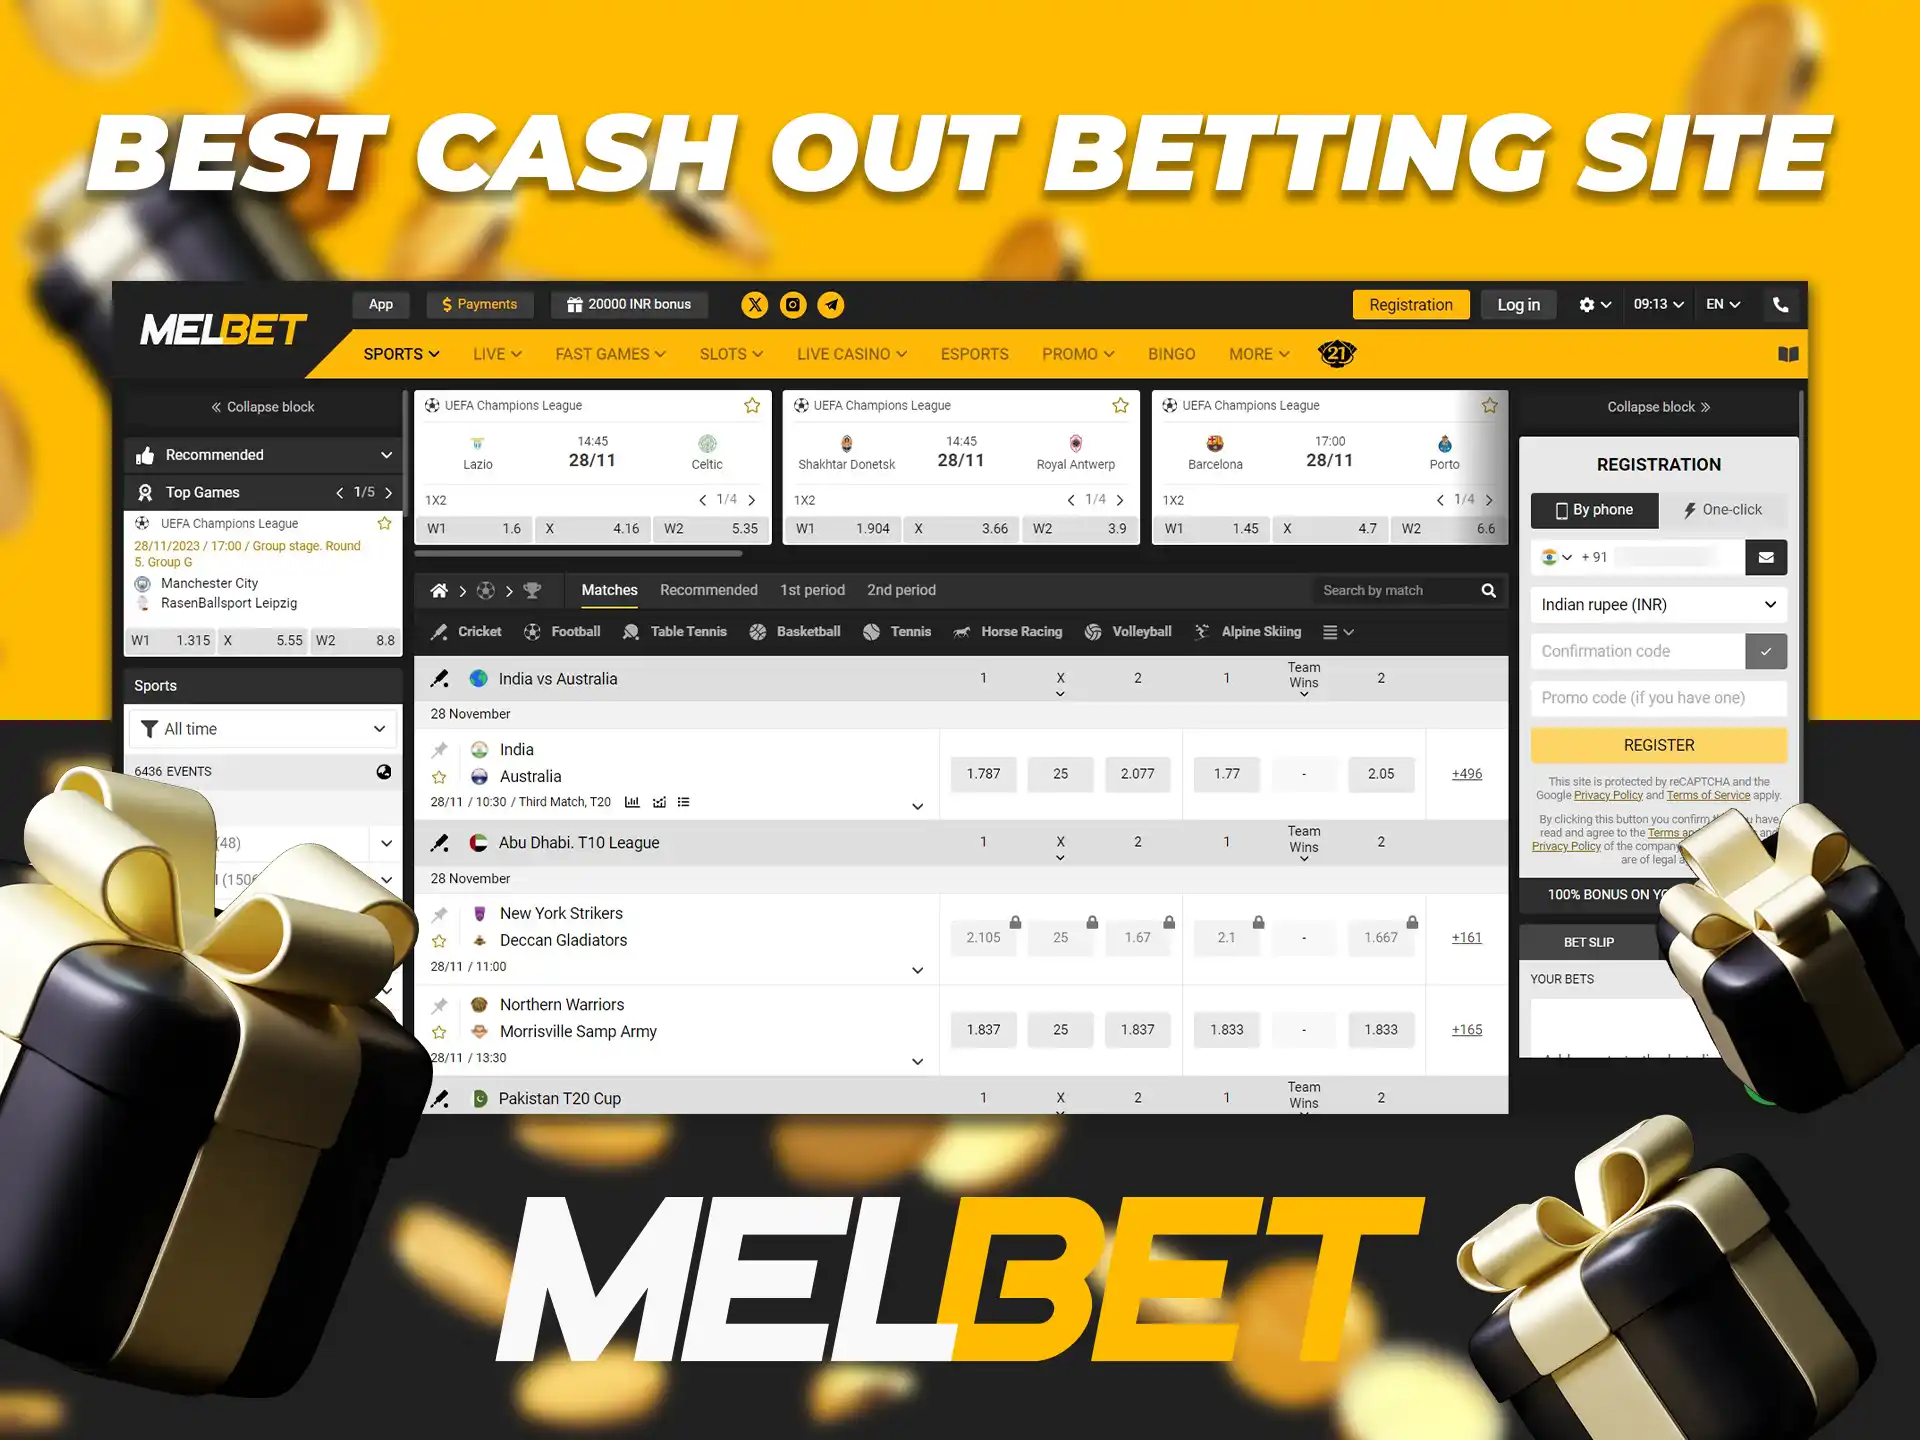 Melbet is known for its convenient cashout feature and wide selection of sporting events.